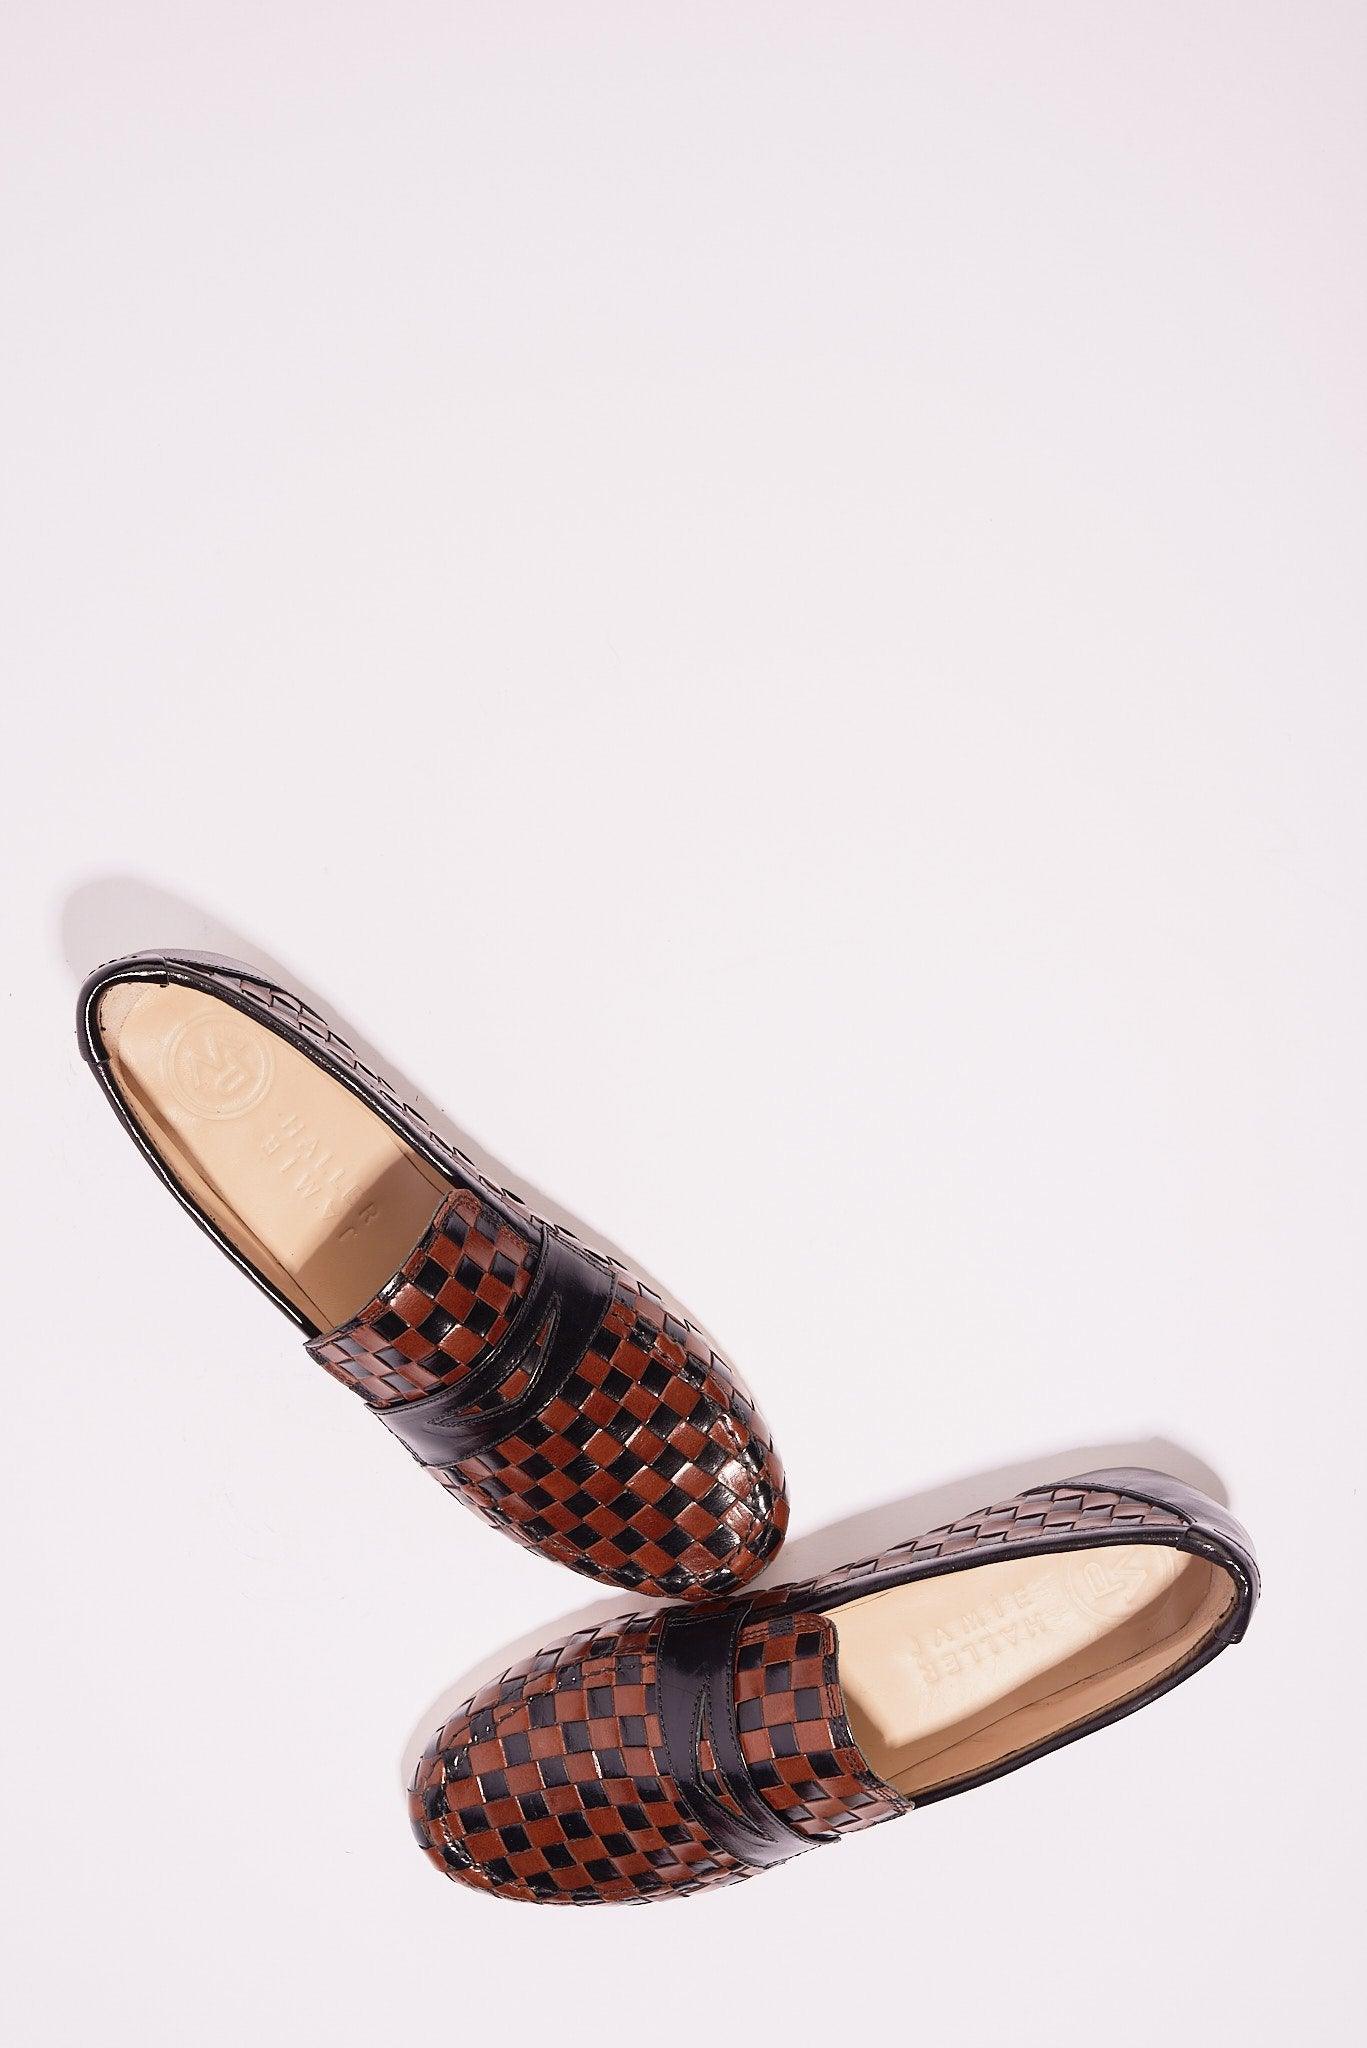 Jamie Haller x PW Woven Loafer in Black & Brown